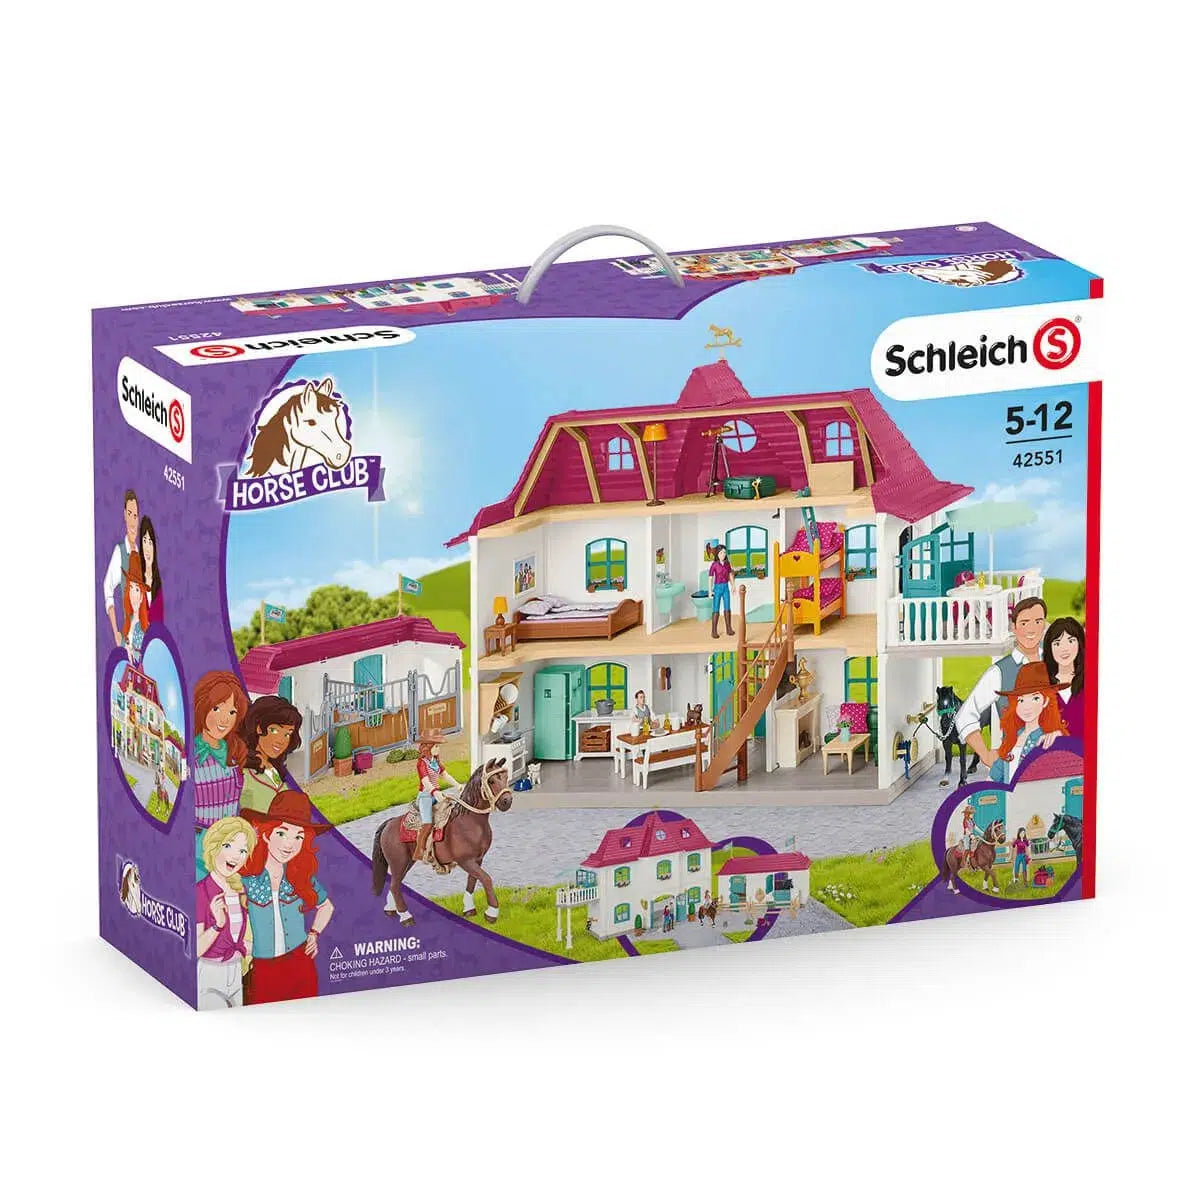 Schleich-Lakeside Country House and Stable-42551-UPC 1-Legacy Toys